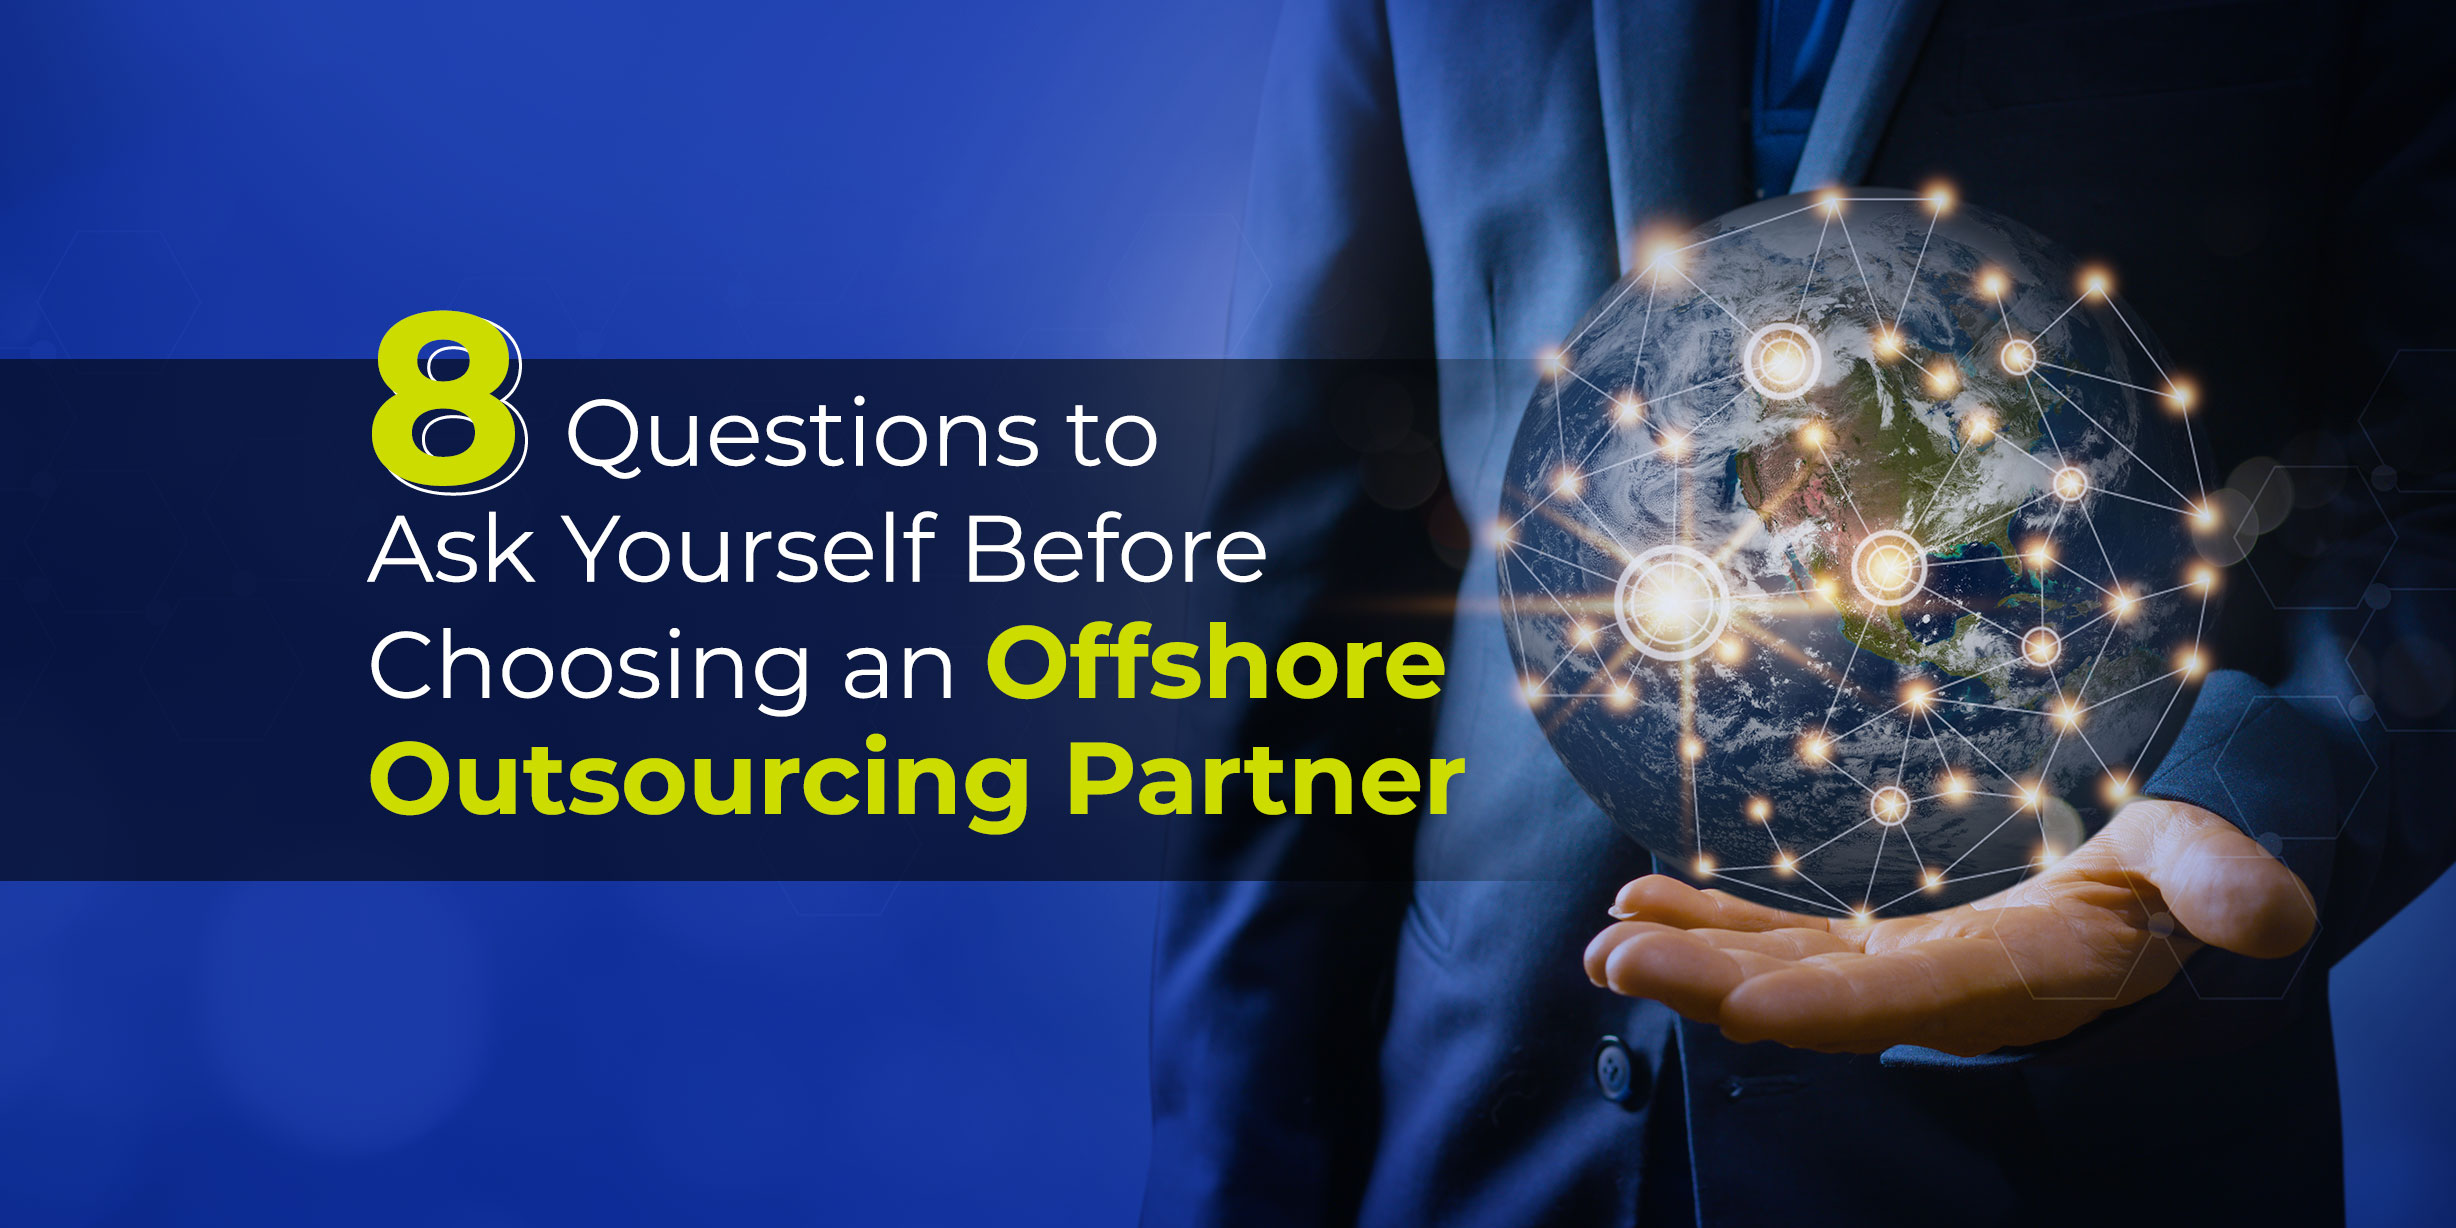 8 Questions to Ask Yourself Before Choosing an Offshore Outsourcing Partner